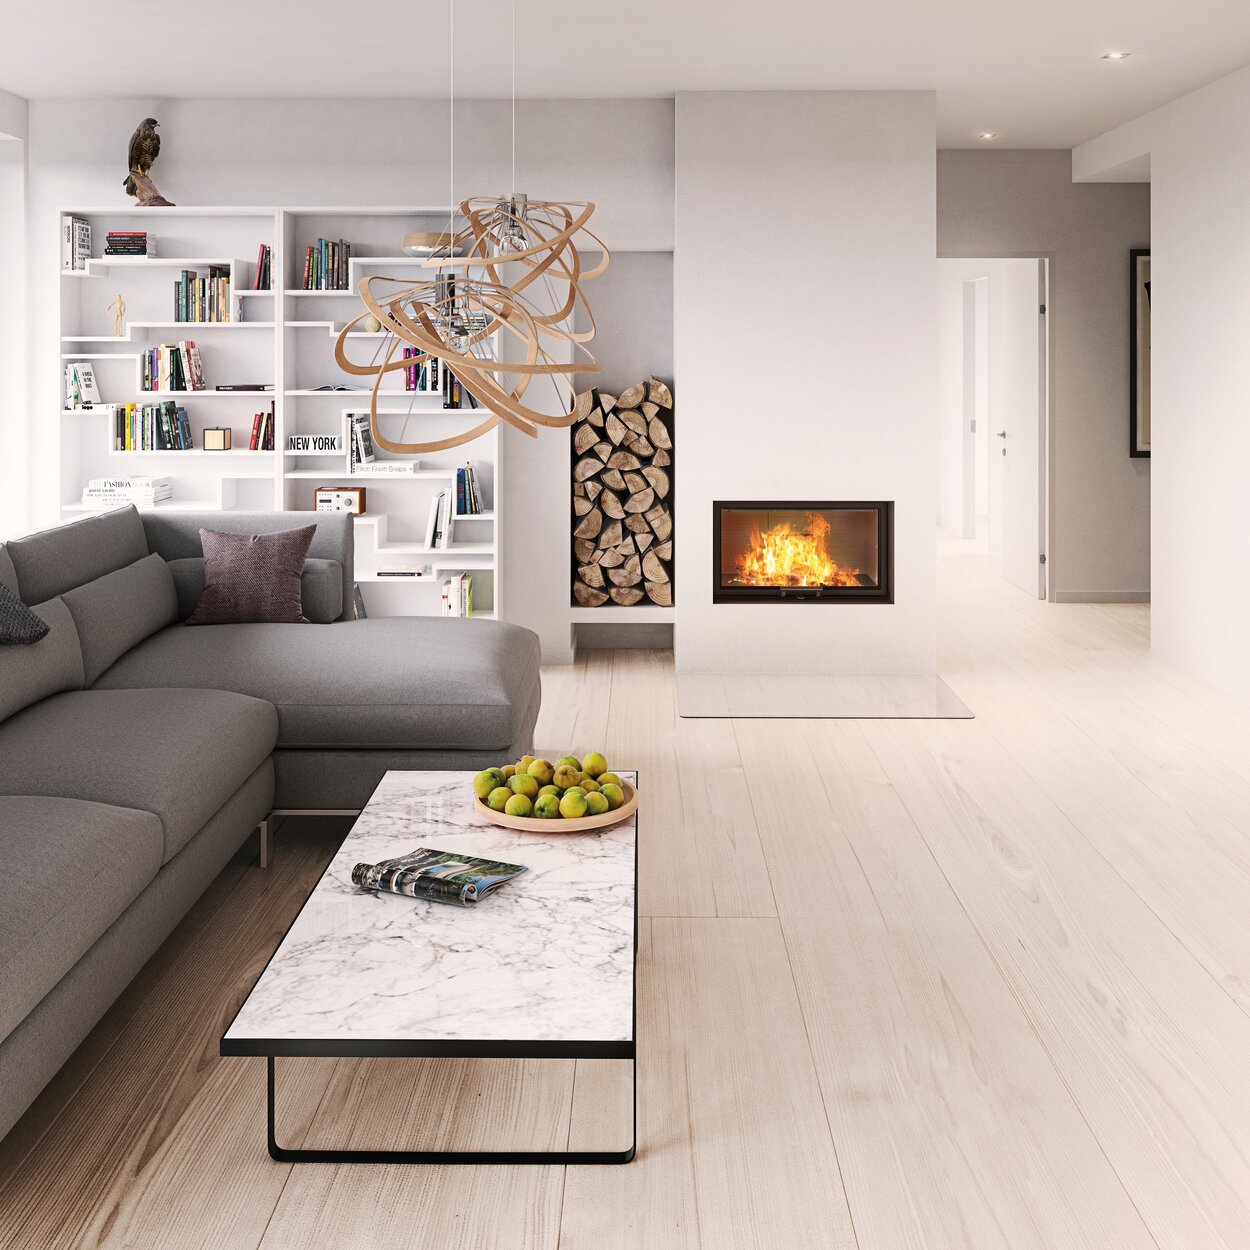 Wood fireplace insert VISIO 1, the front model in the modern living room